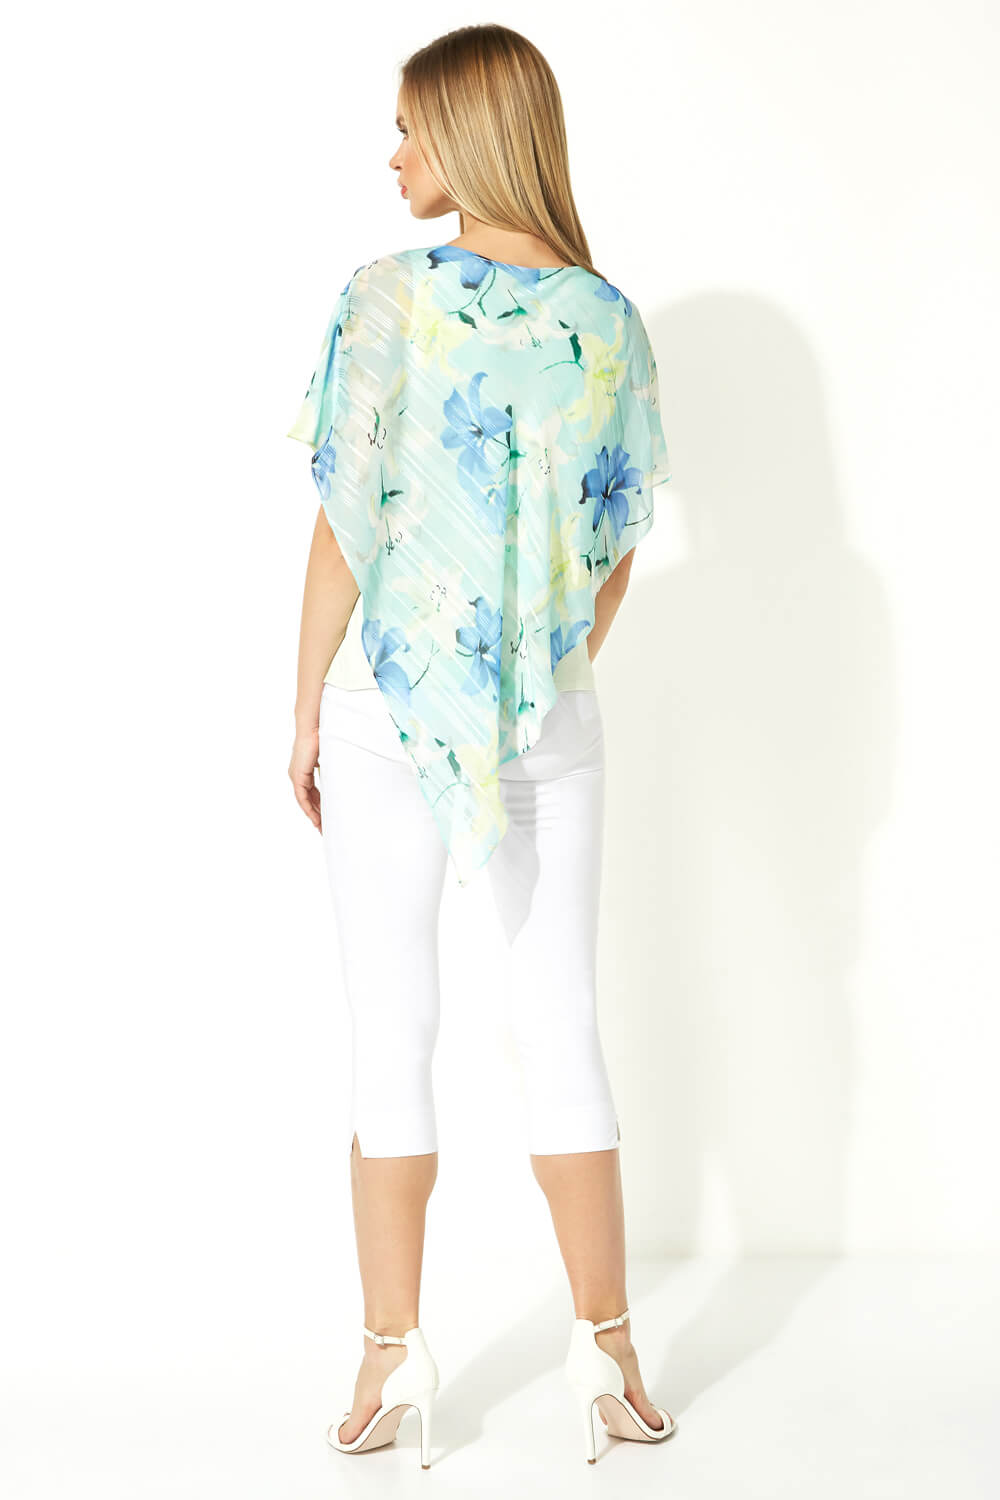 Mint Floral Print Asymmetric Overlay Top, Image 3 of 5